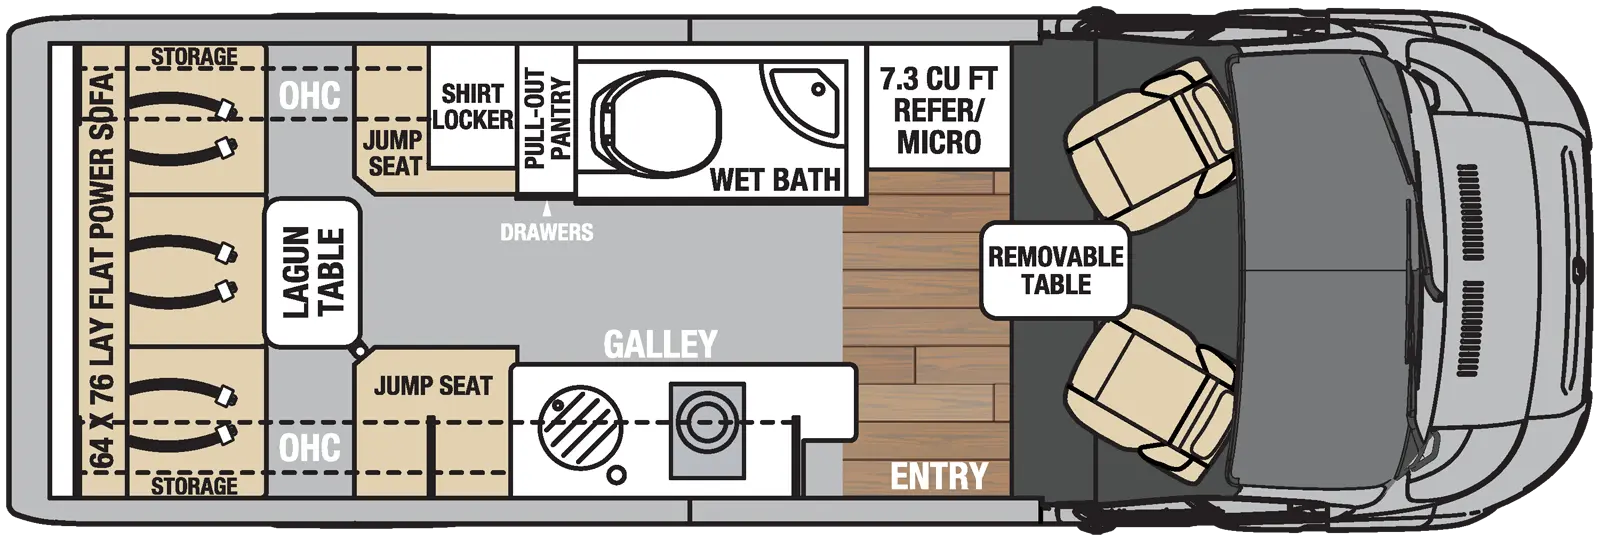 The Nova 20C has 0 slideouts and 1 entry door and rear doors. Interior layout from front to back; removable table; door side 7.3 cubic feet refrigerator and microwave; door side near entry Galley kitchen with LP cooktop and single sink with overhead cabinets; off door wet bath room with toilet and sink; door side jump seat and overhead cabinets; off-door side pull out pantry and shirt locker and jump seat with overhead cabinets; rear 64 inch by 76 inch flat power sofa with storage.